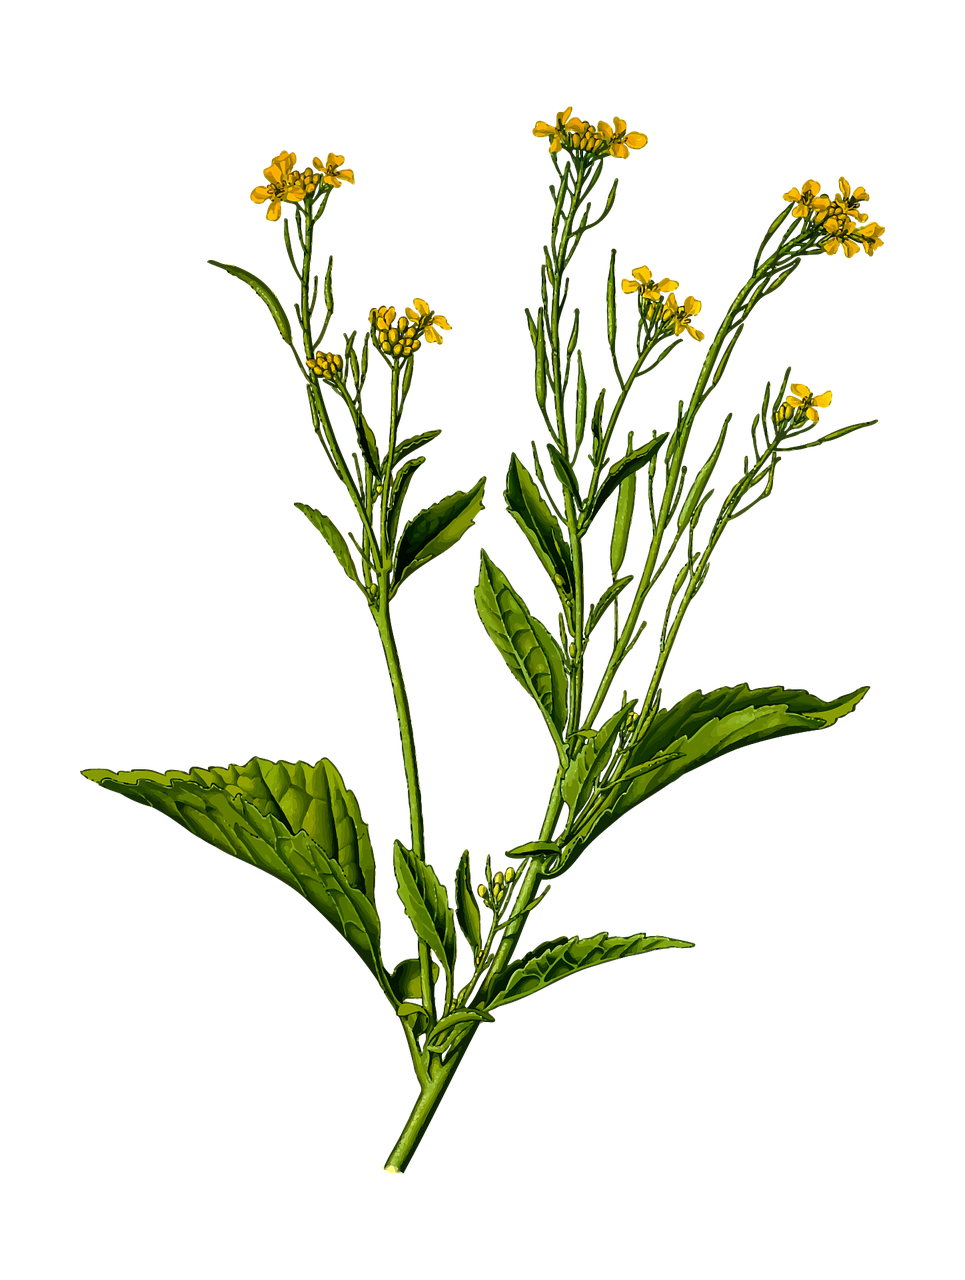 The Greatest Herb: The Mustard Plant